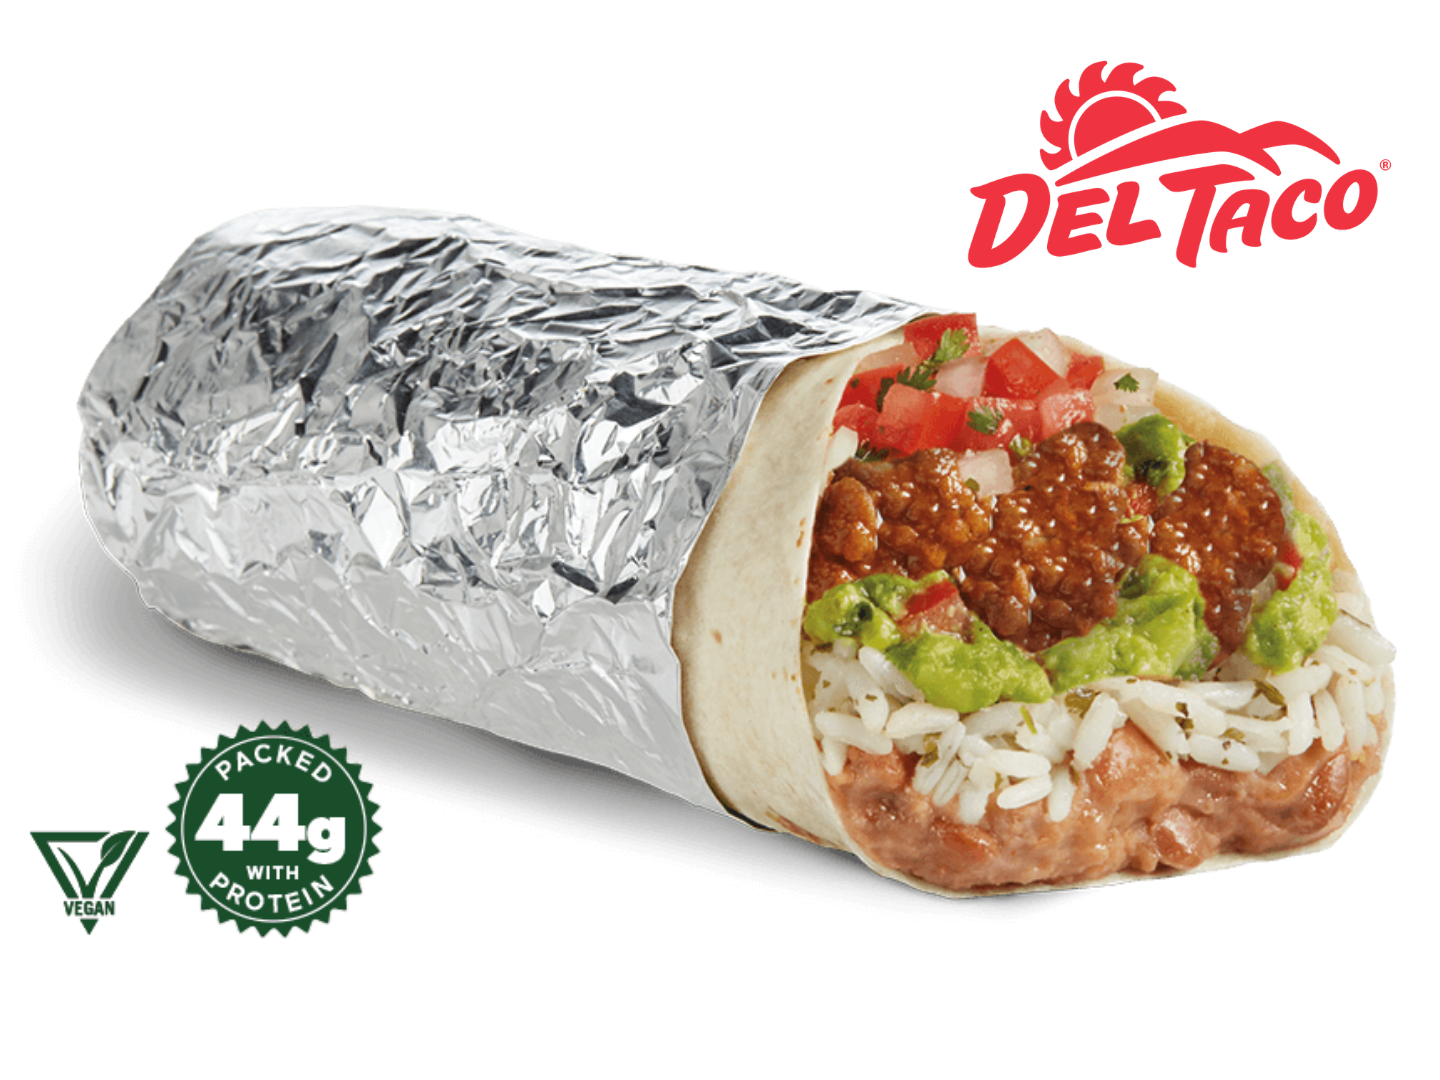 Del Taco Launches Two New Beyond Meat Vegan Burritos